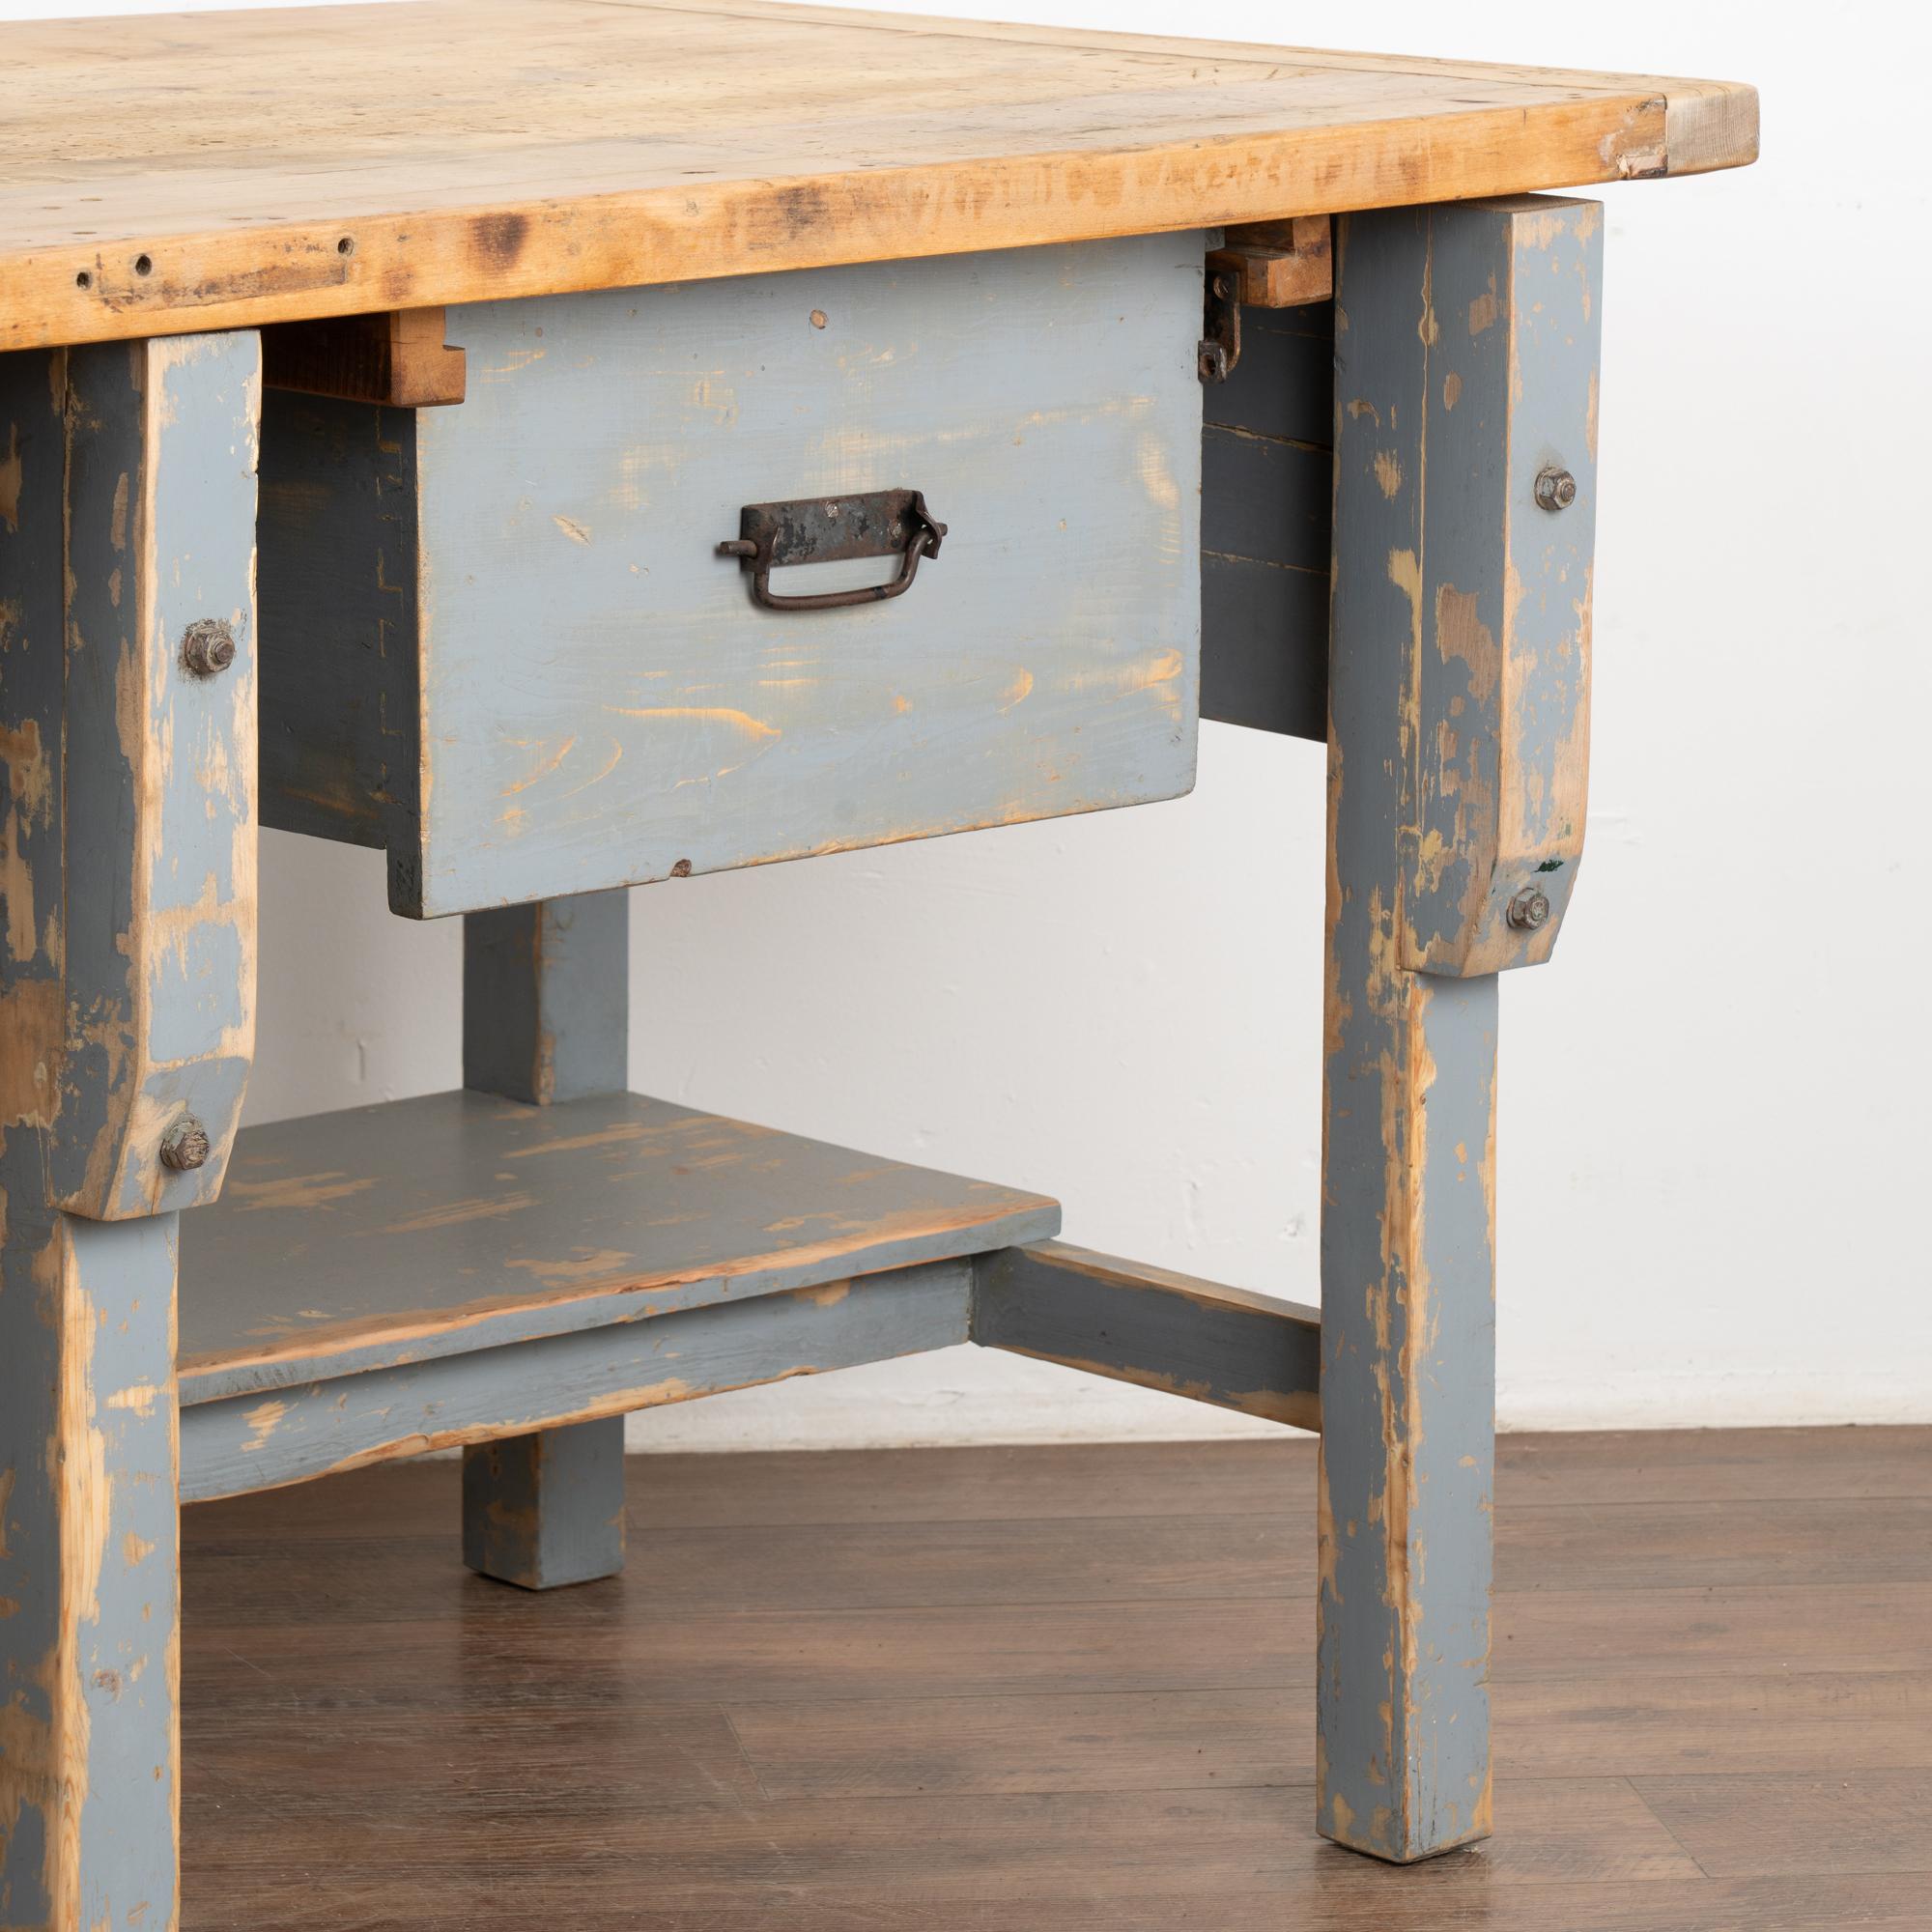 Large Blue Rustic Work Table Kitchen Island With 2 Drawers and Shelf, Circa 1890 For Sale 1